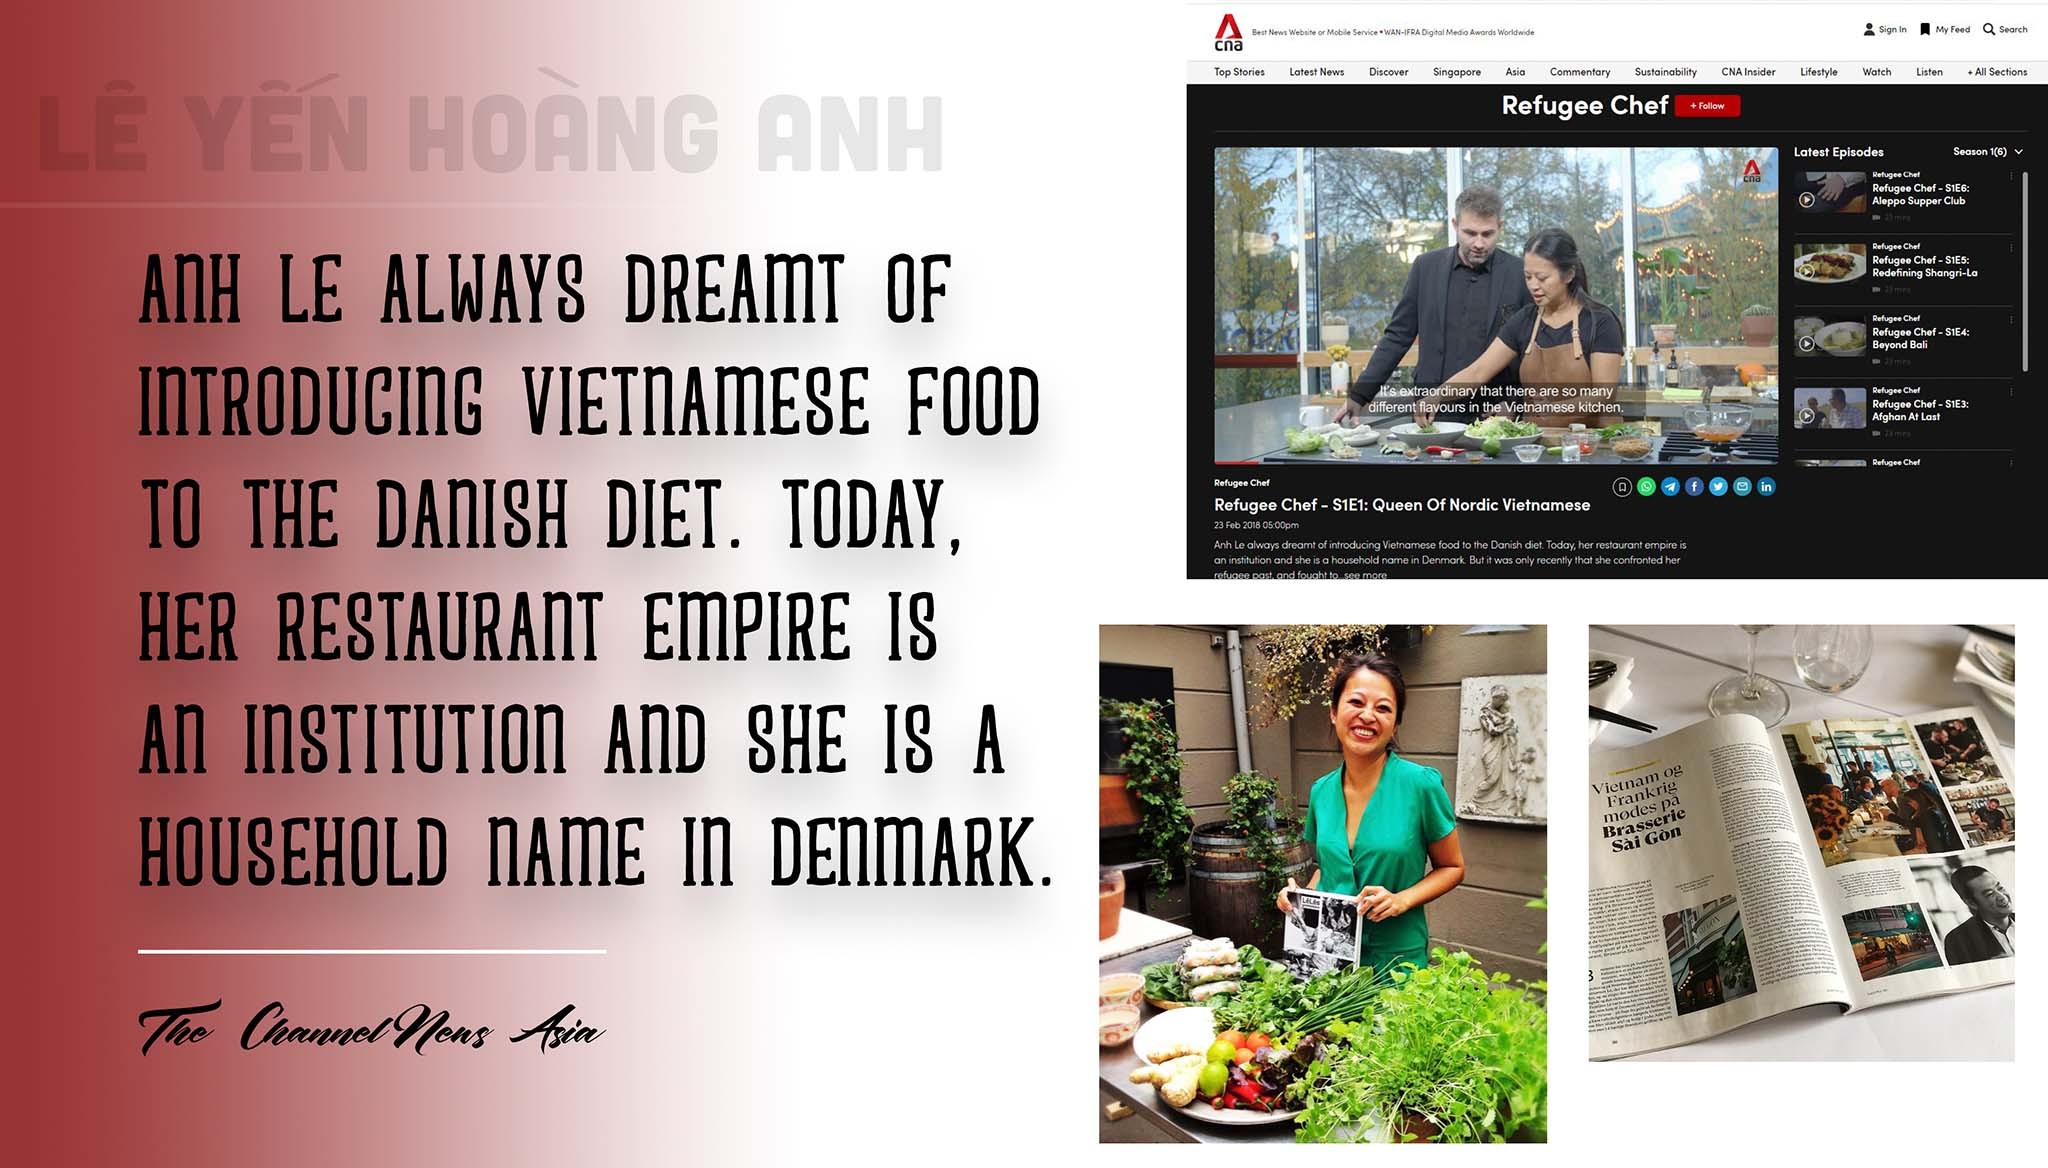 Chef Anh Le and her longing for Vietnam